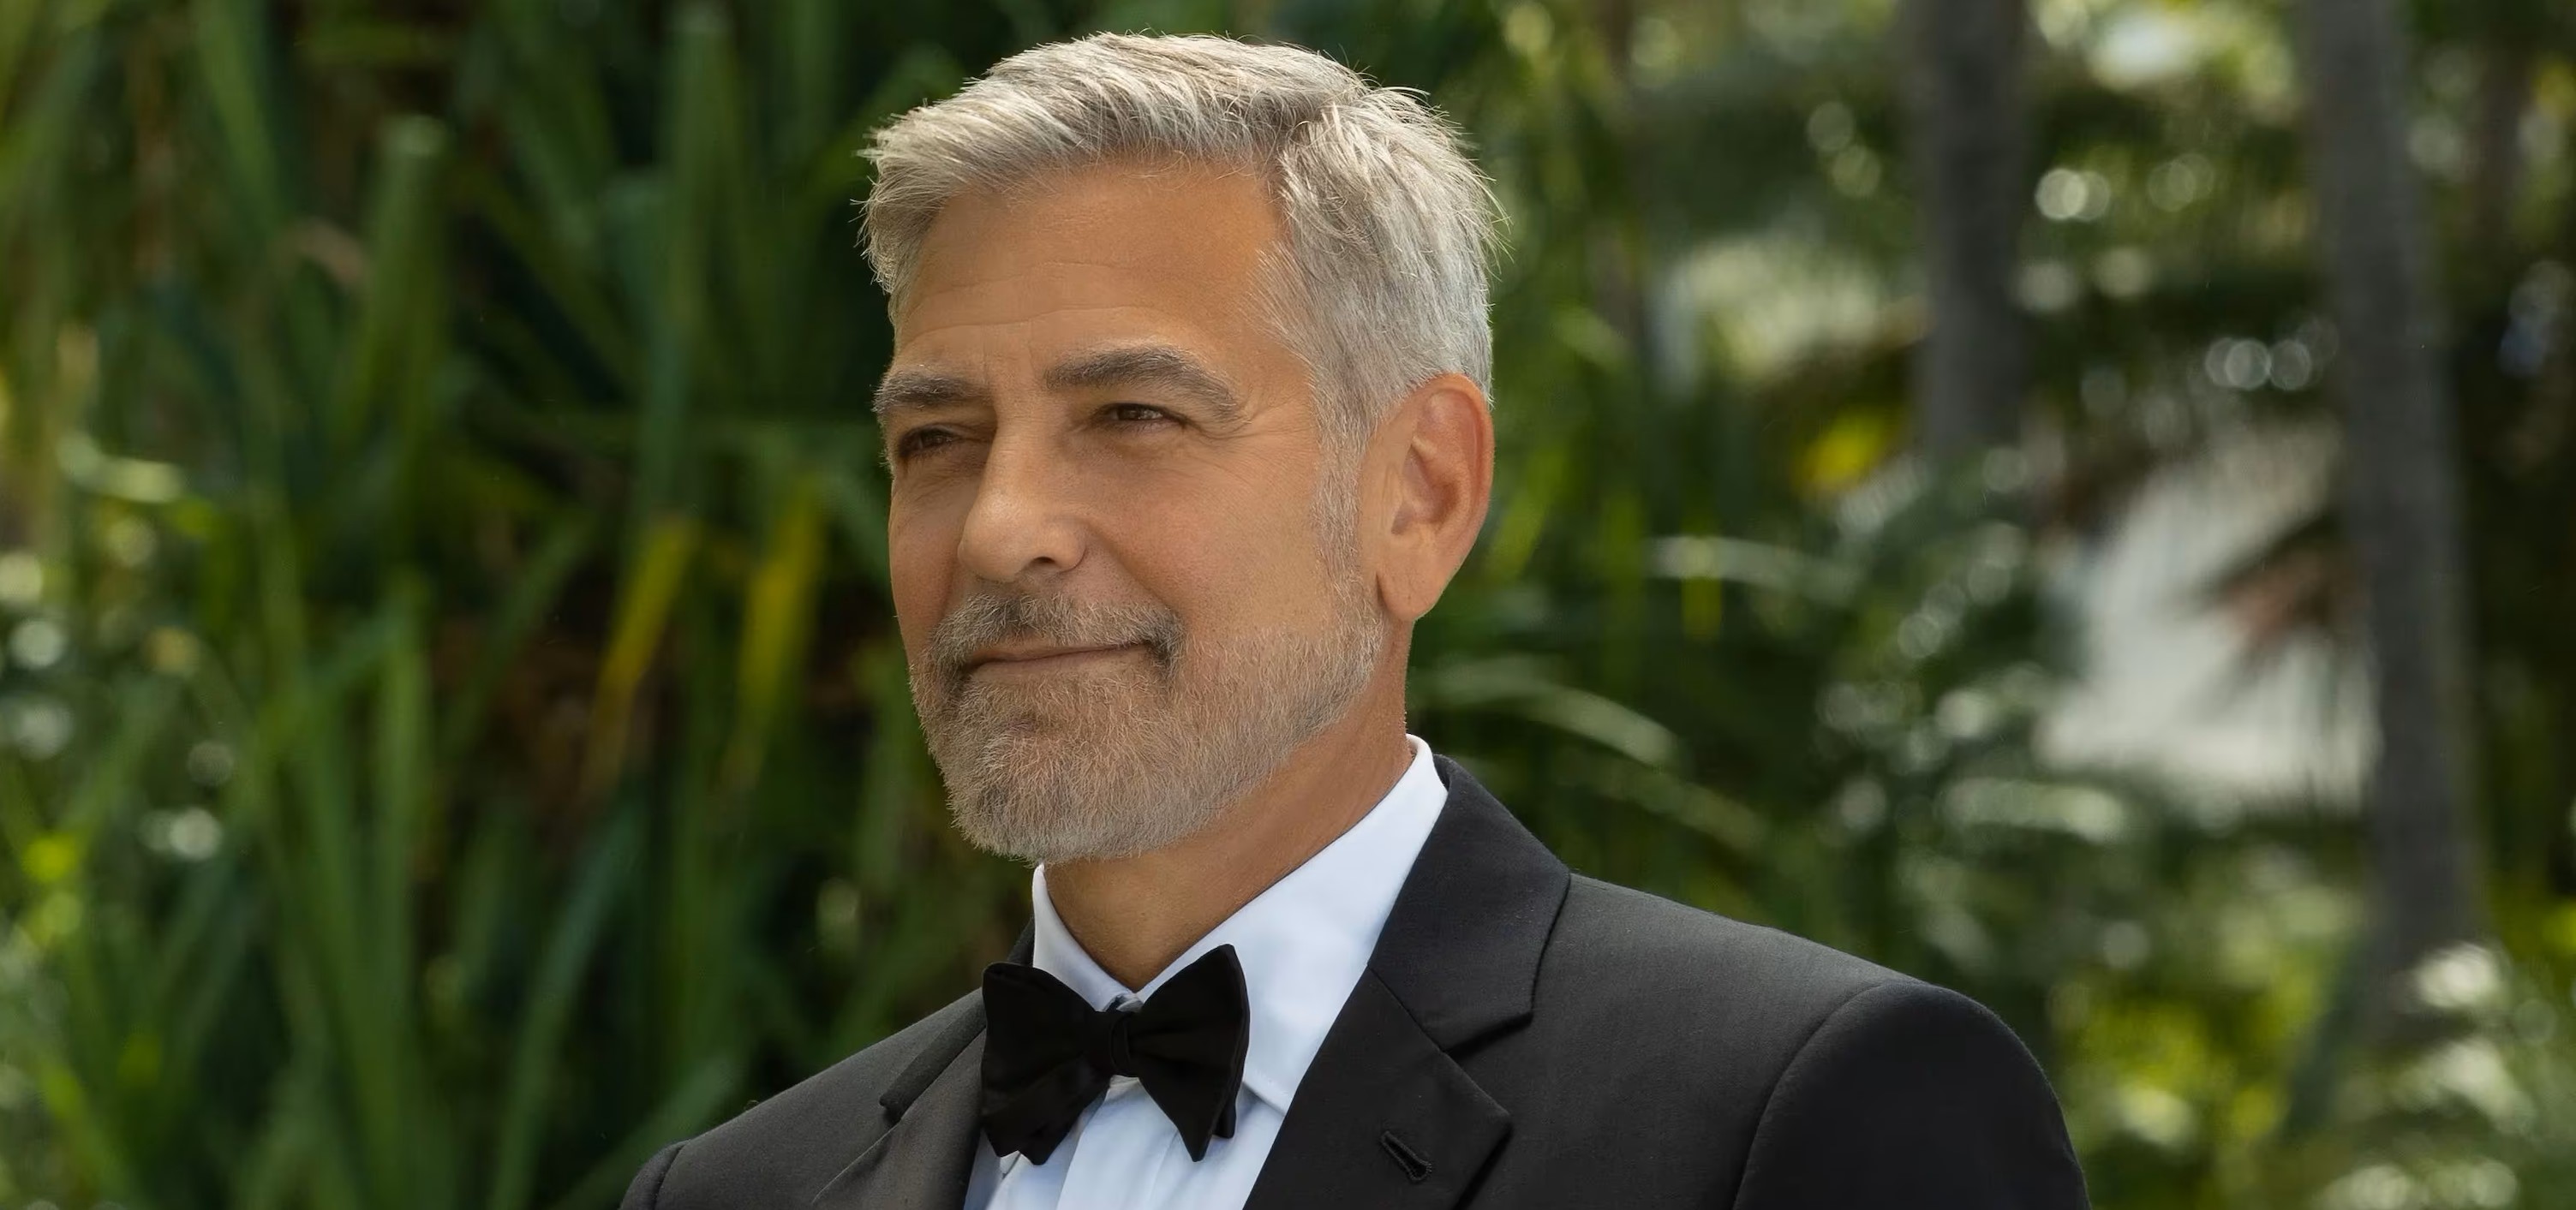 George Clooney’s The Department Starts Filming in London Next Month